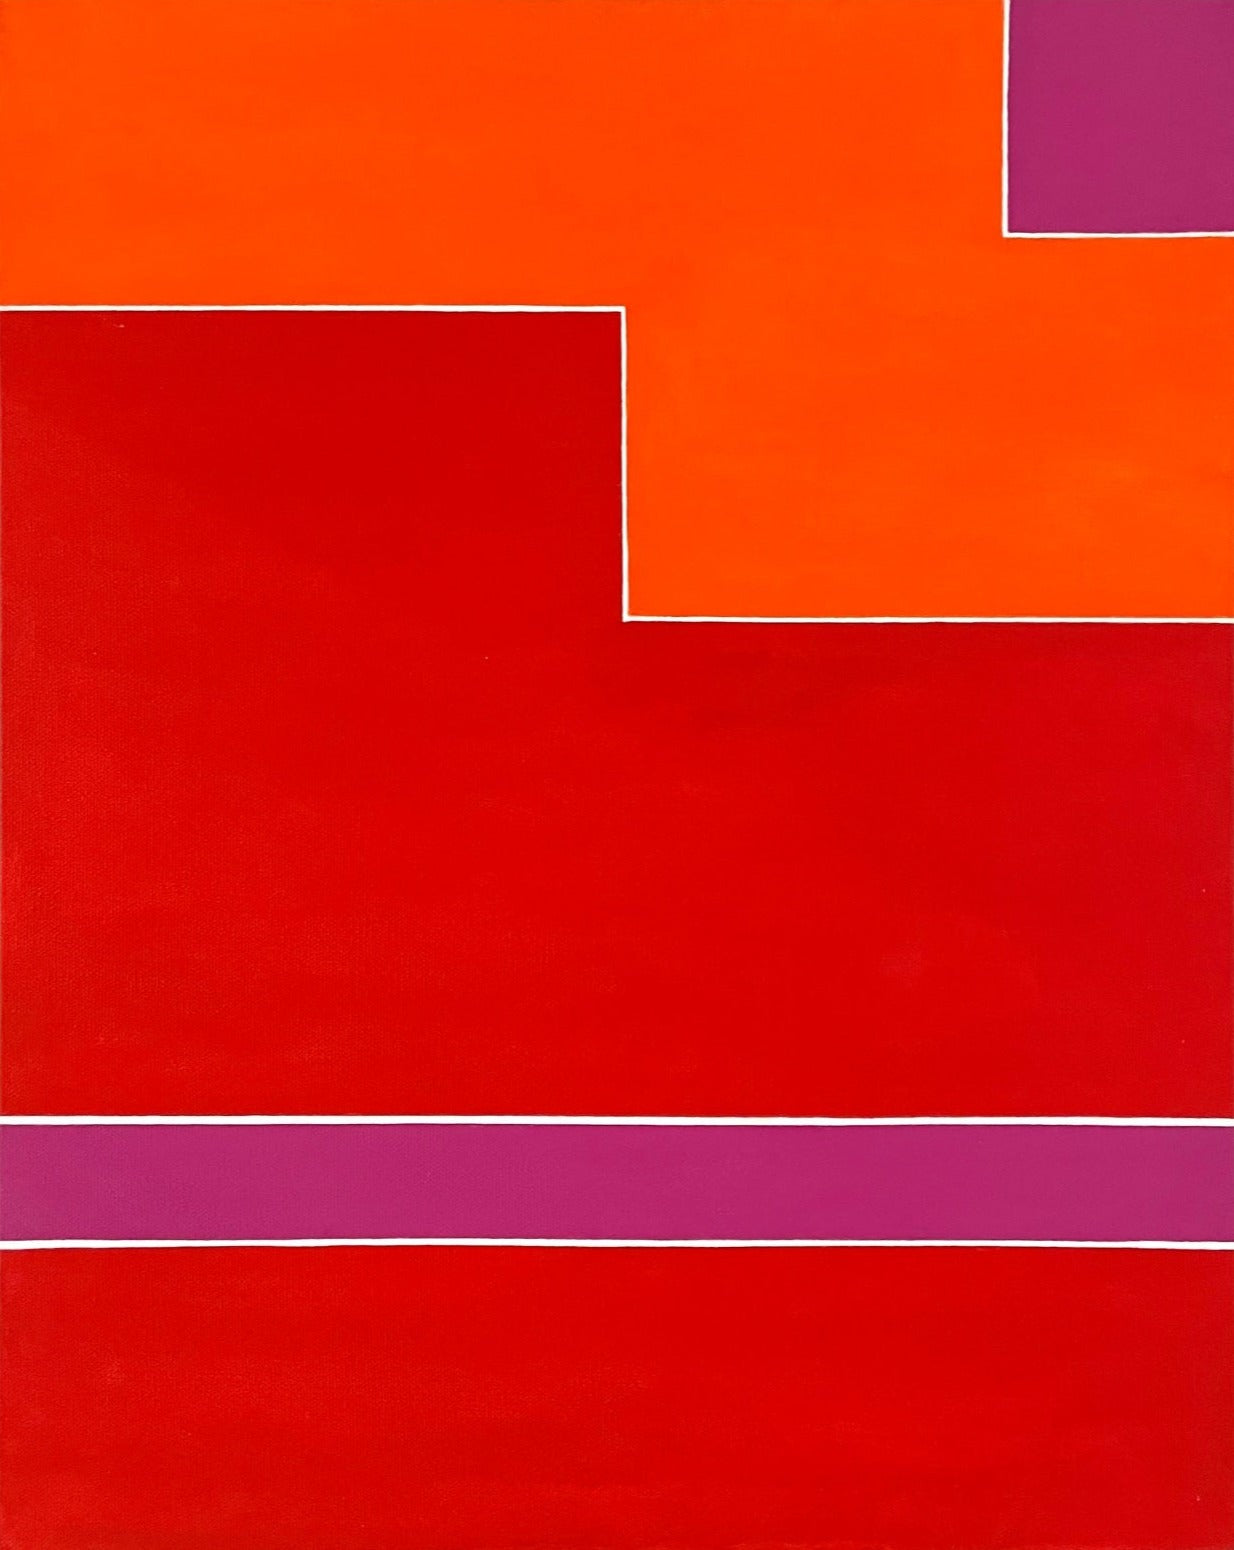 Ron Burkhardt, Study of Red (Adobe Indian Summer), 2021, Acrylic on canvas, 20 x 16 inches, notism artwork